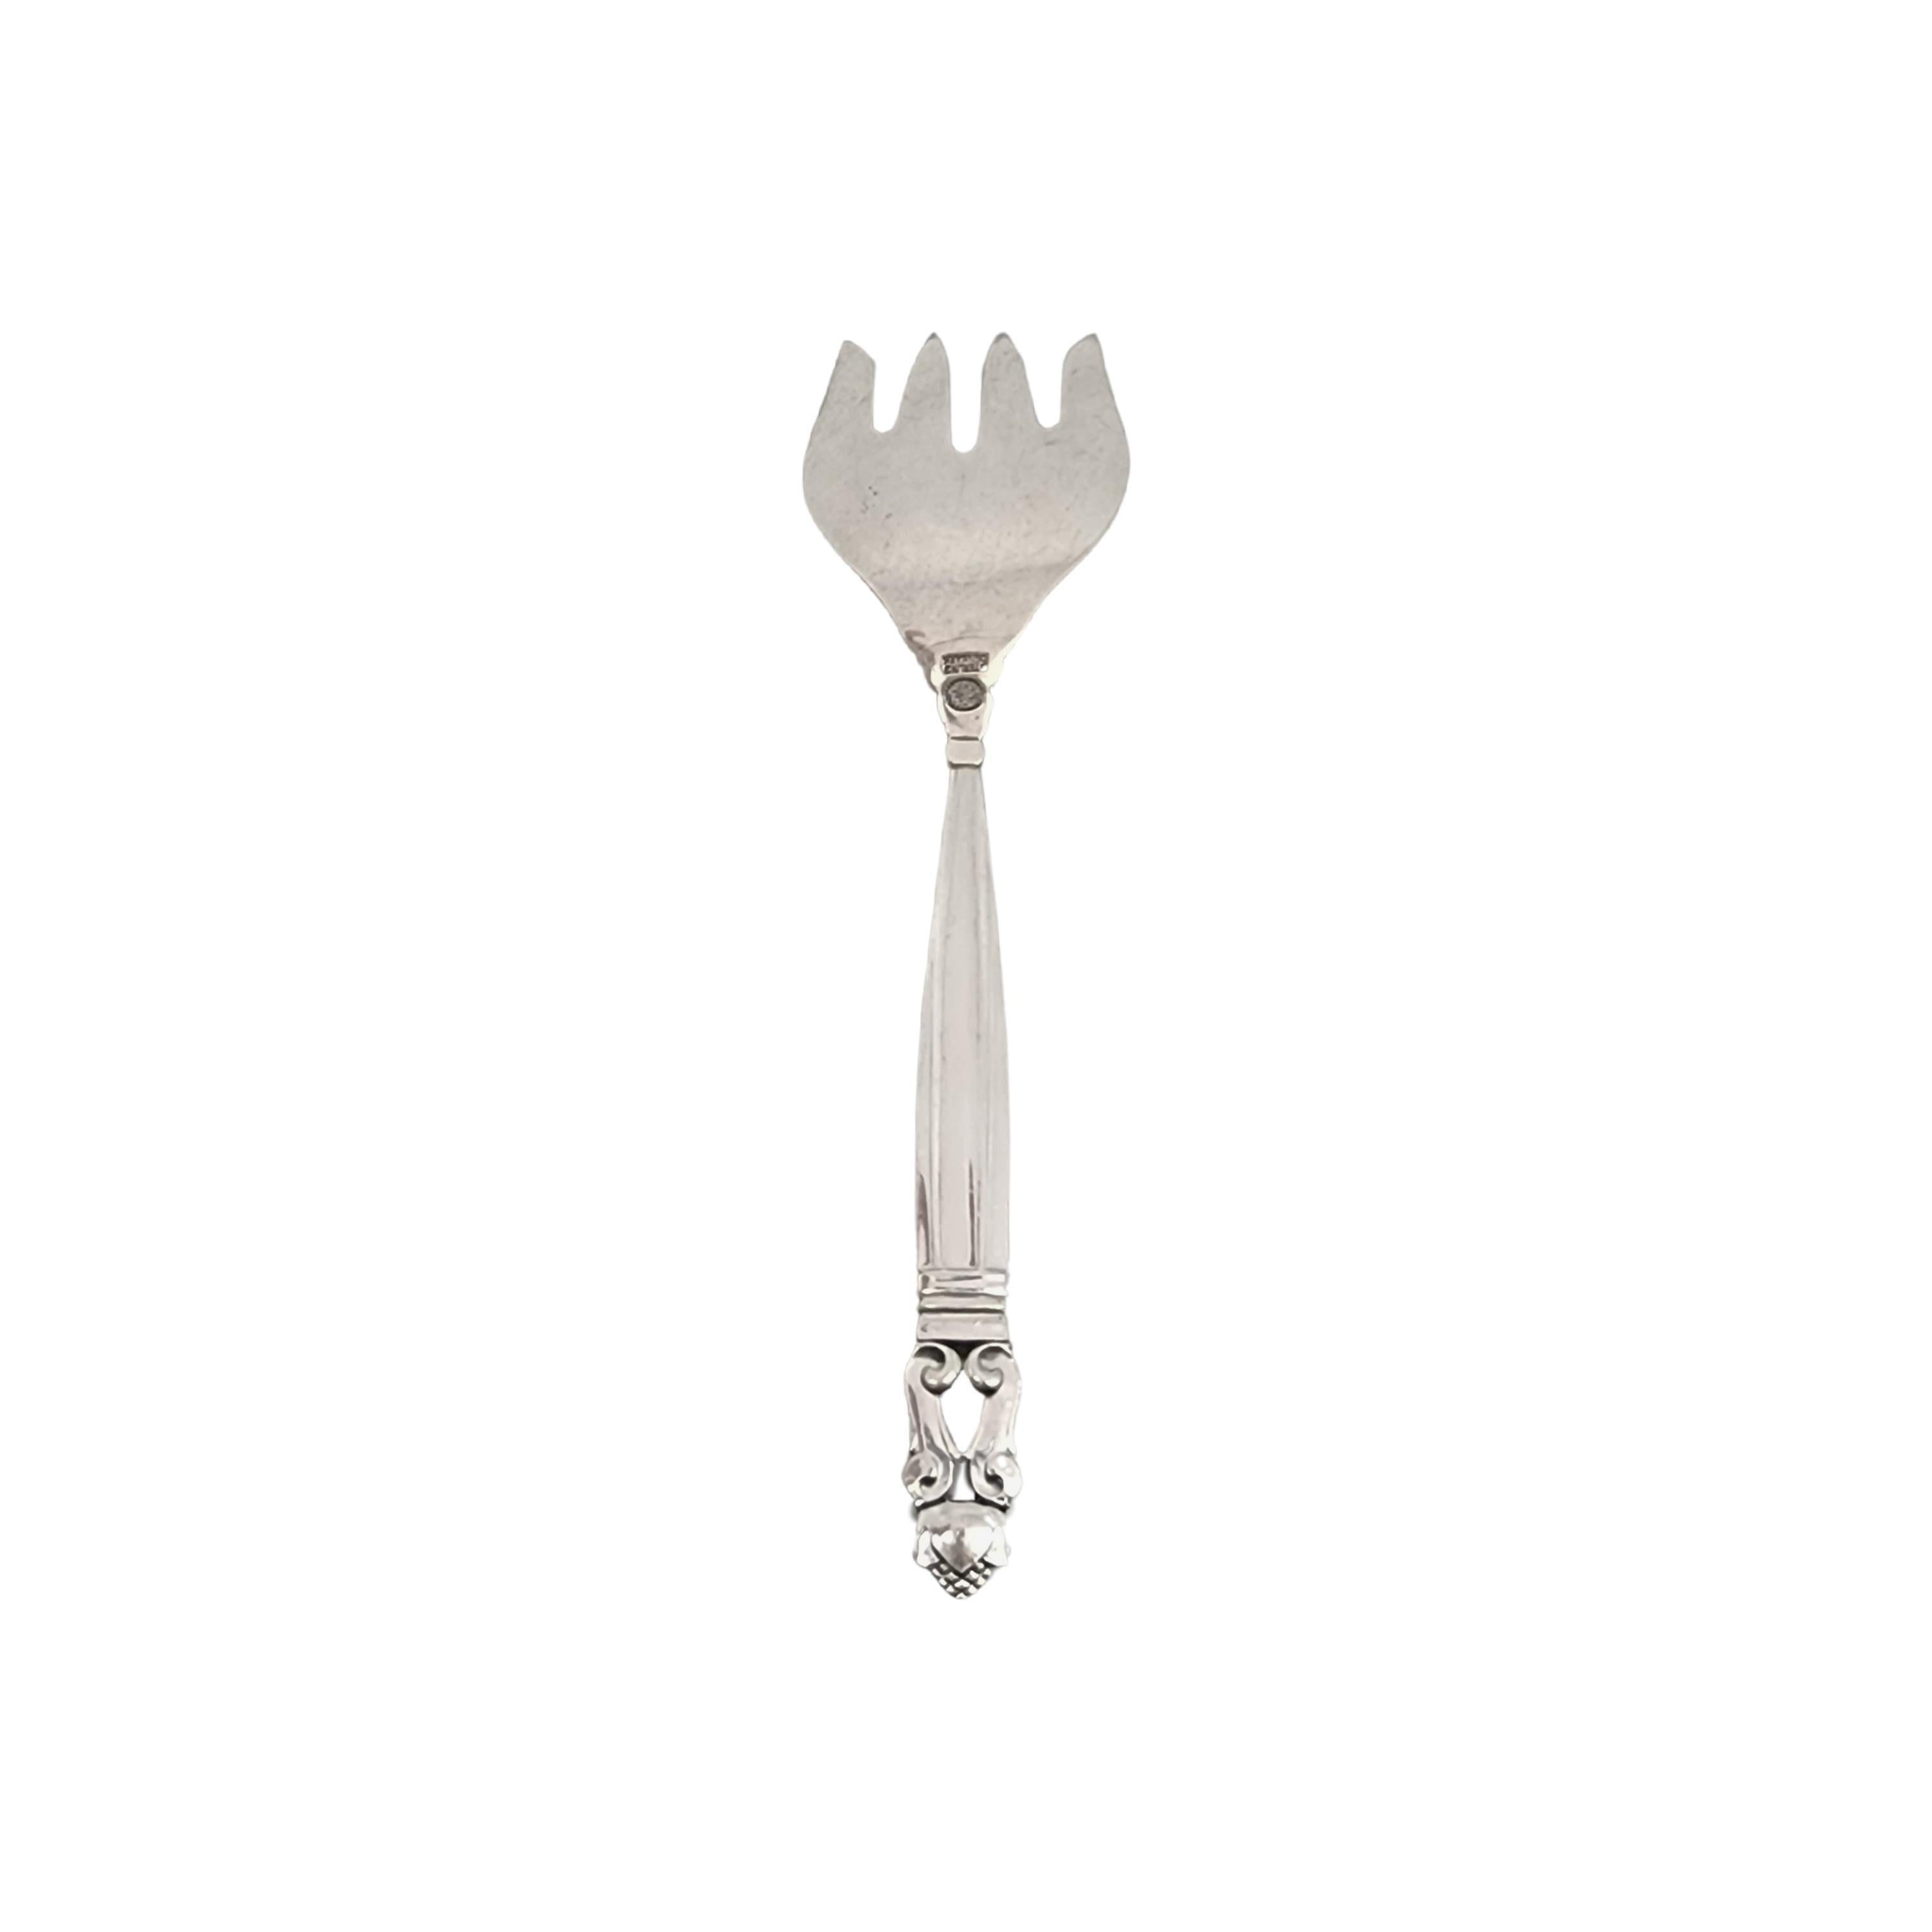 Vintage Georg Jensen Denmark sterling silver sardine serving fork in the Acorn pattern.

 No monogram.

The Acorn pattern was introduced in 1915 as a collaboration between Georg Jensen and designer Johan Ronde. The pattern, which combines Art